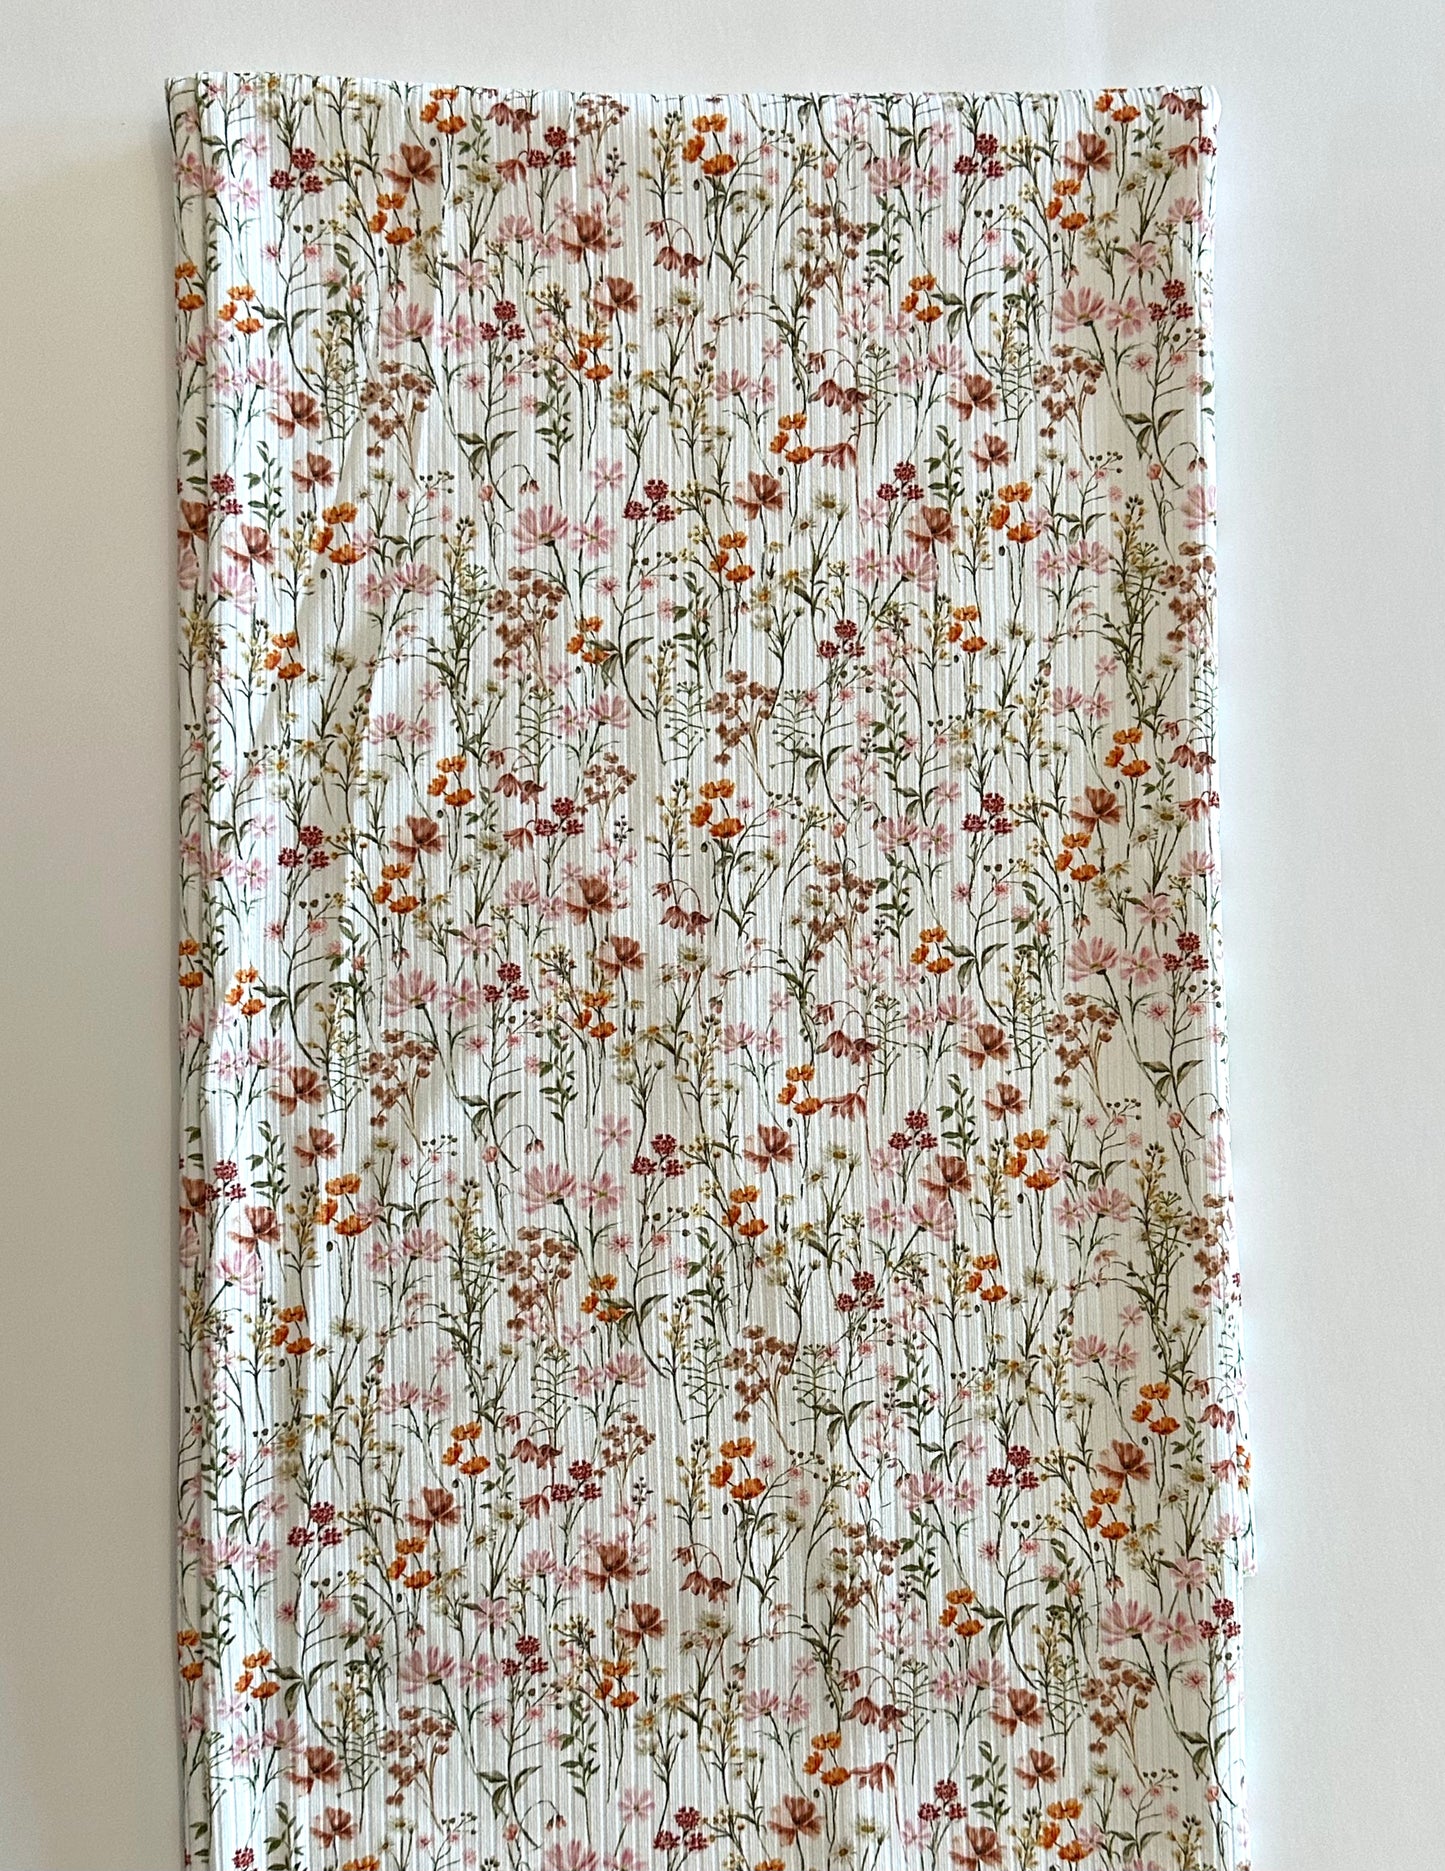 Payton Floral on Unbrushed Rib Knit Fabric Sold by the 1/4 yard